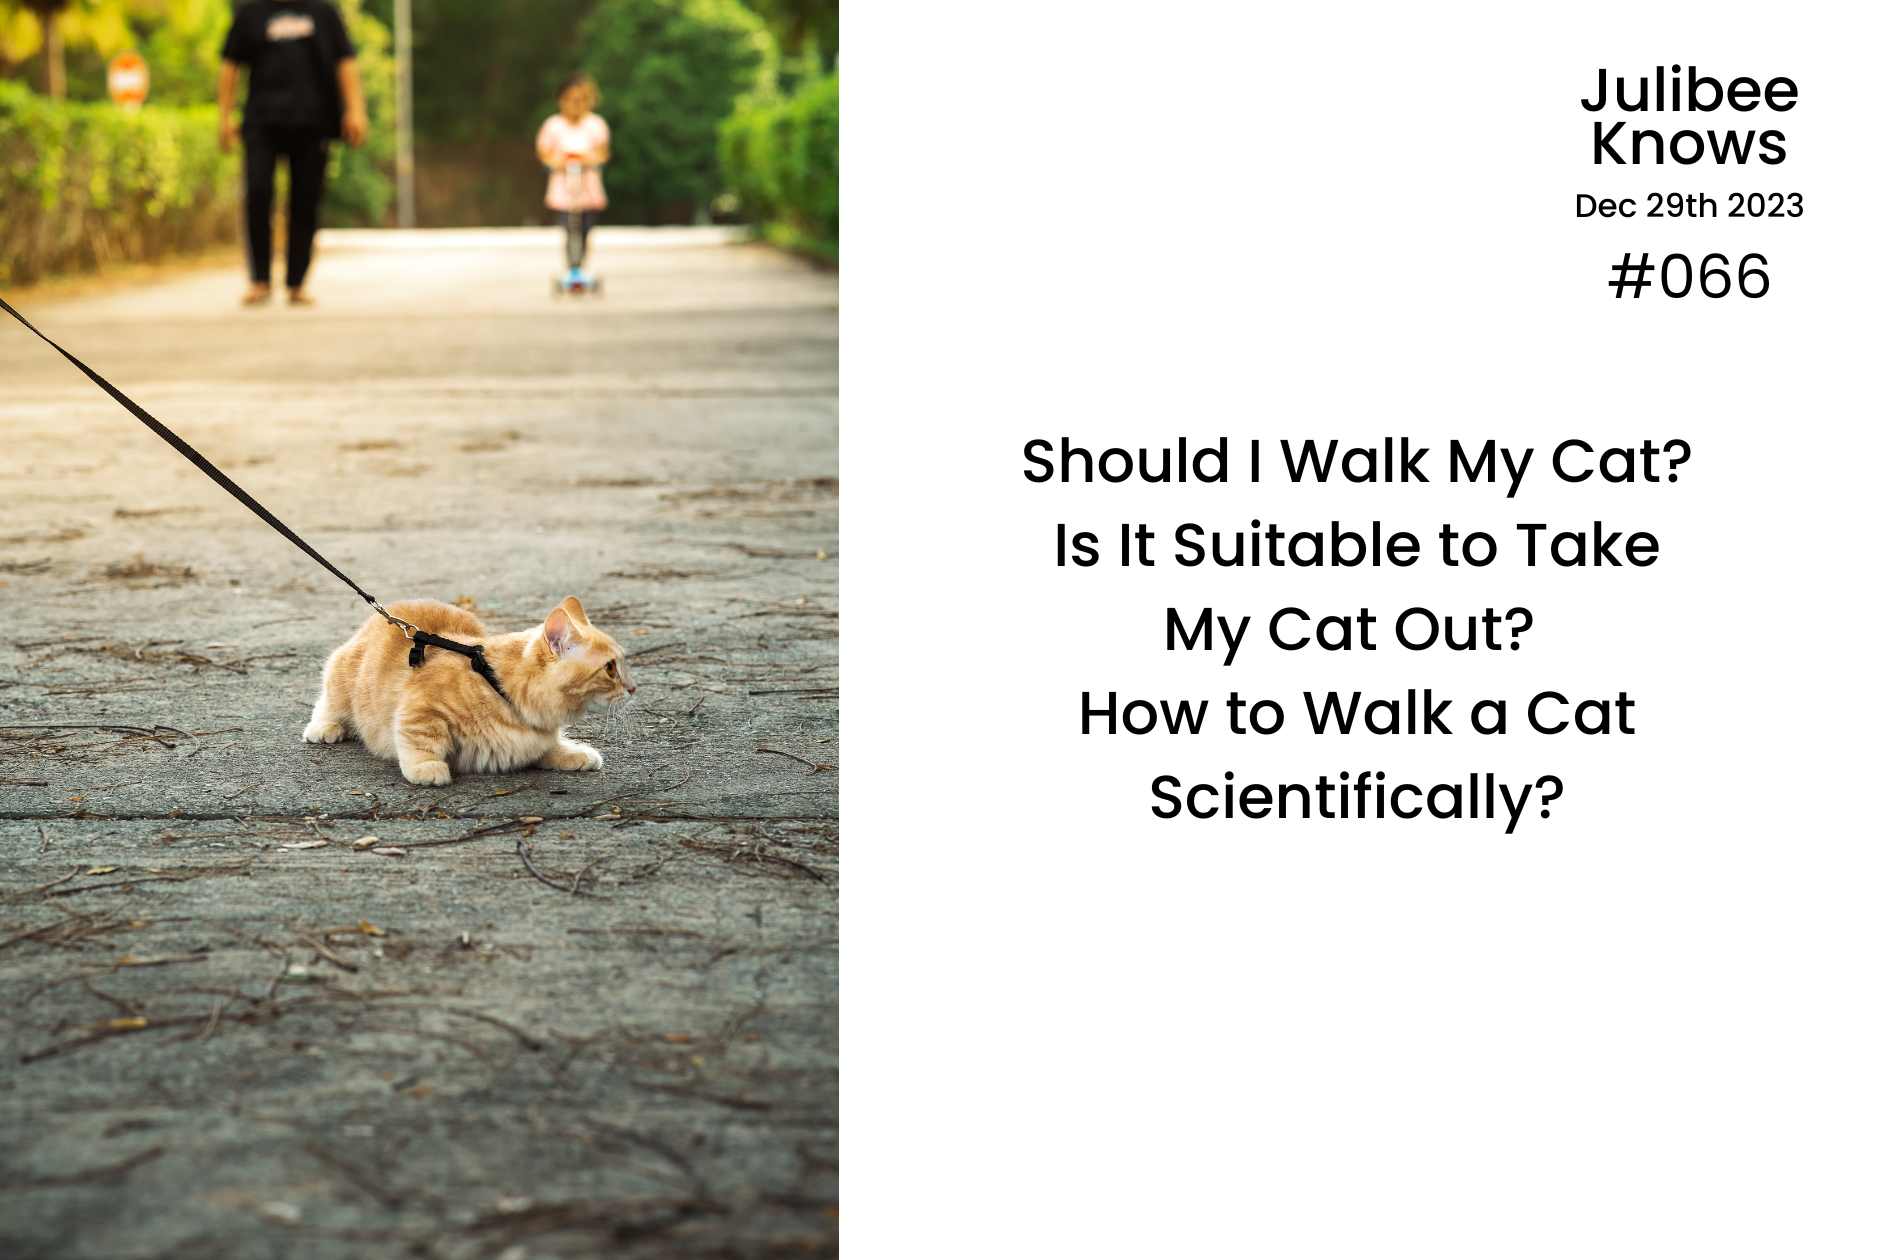 Should I Walk My Cat? Is It Suitable to Take My Cat Out? How to Walk a Cat Scientifically?